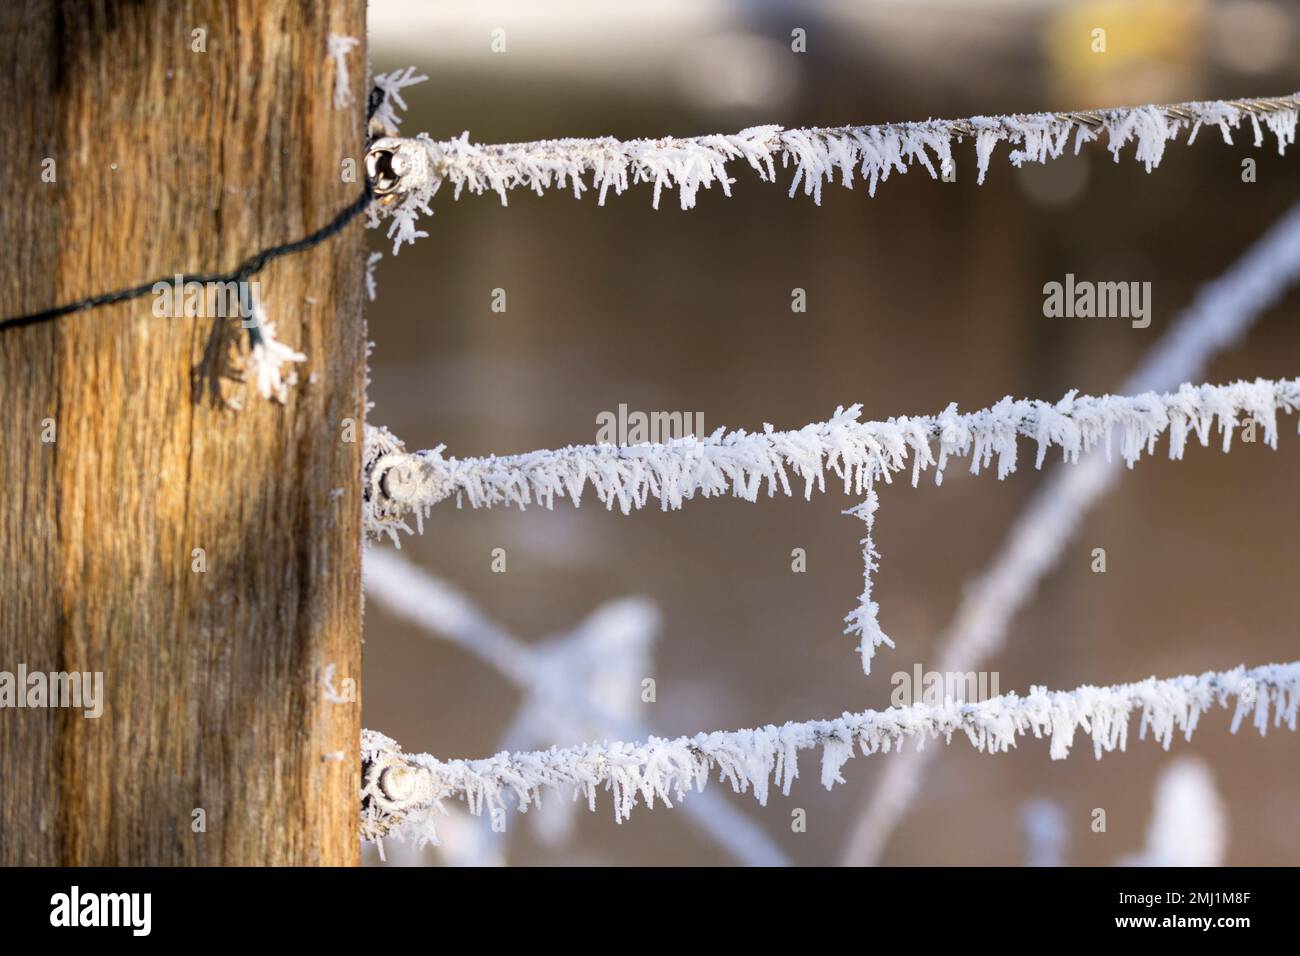 Frosty winter weather with icy deposits on electric fencing hanging like ice chrystals along the cold steel wires Stock Photo